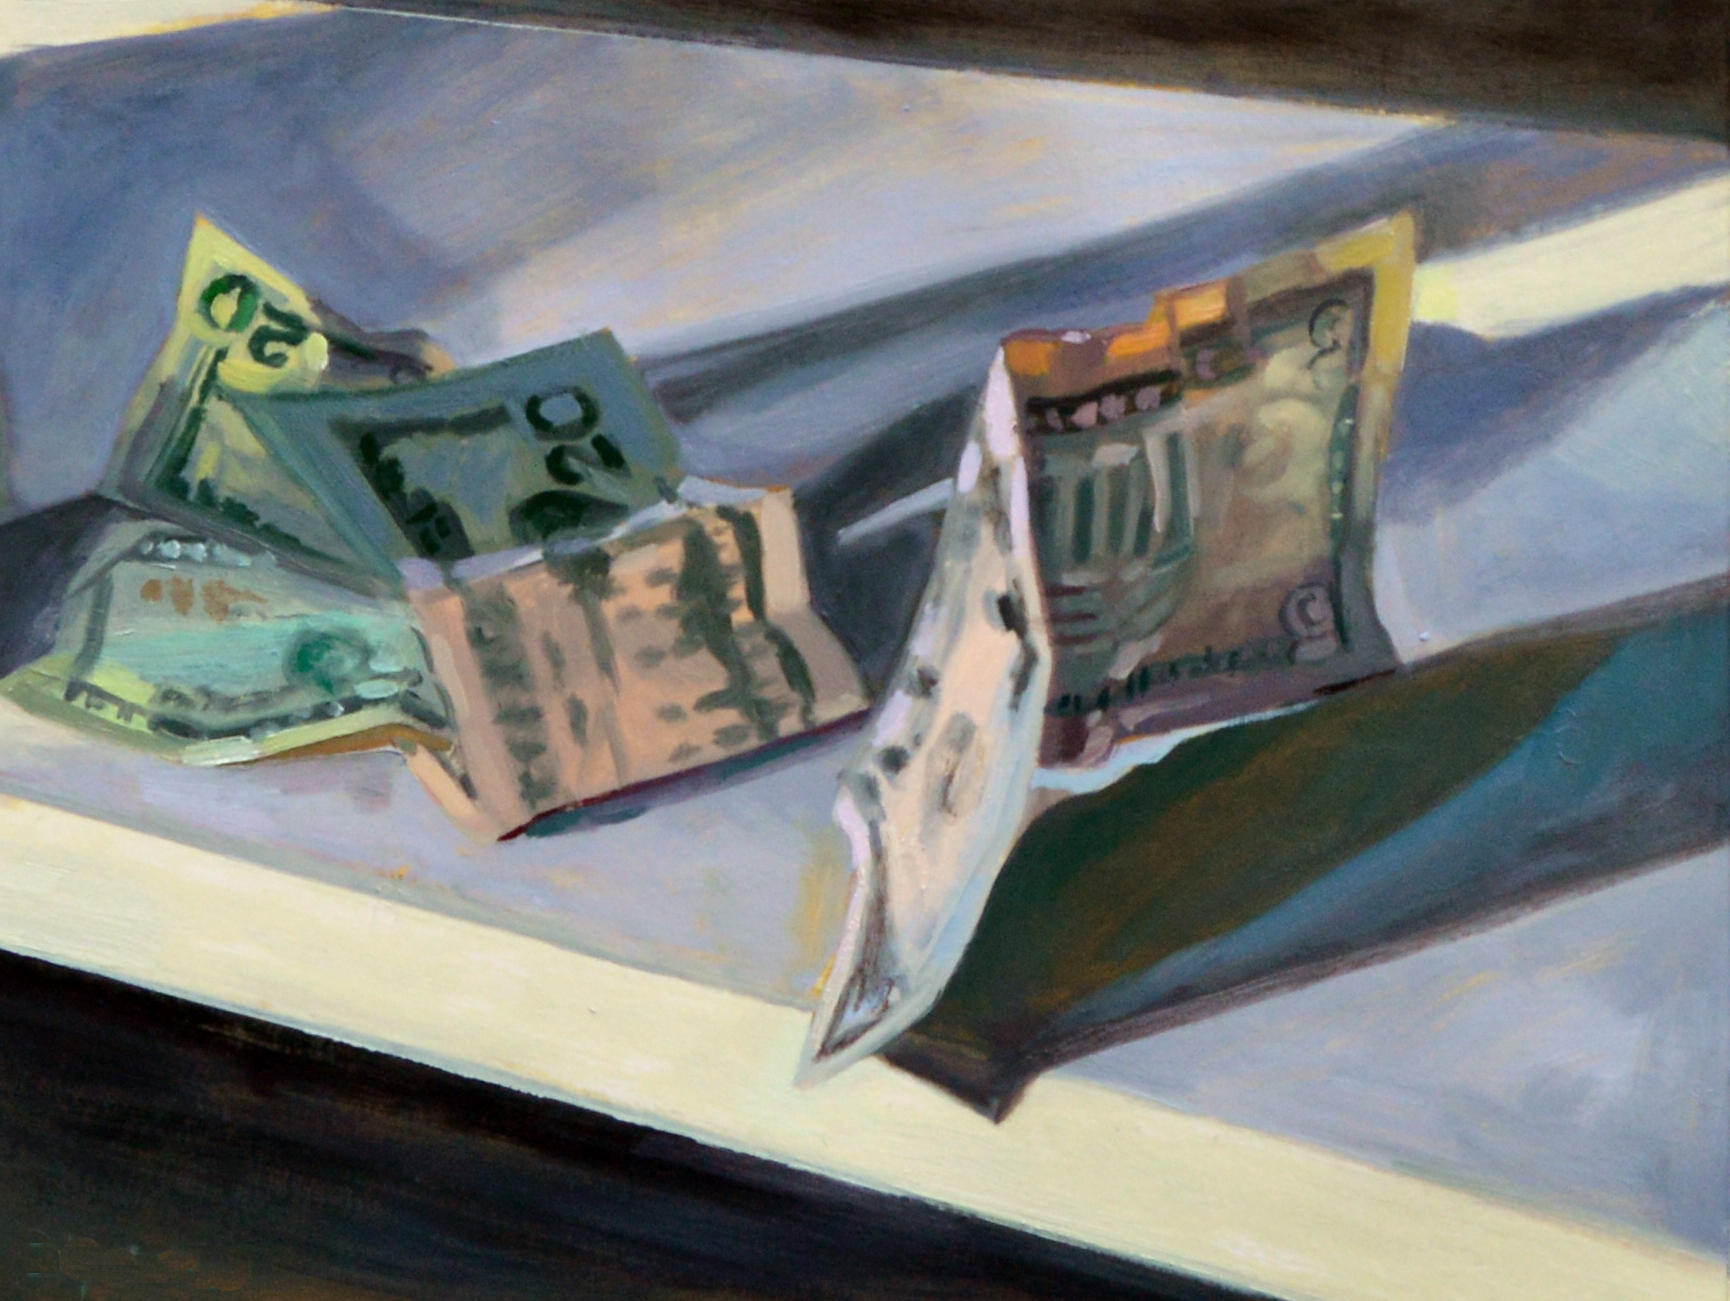 Untitled (money 1), 2017, oil on paper, 11 x 14 in